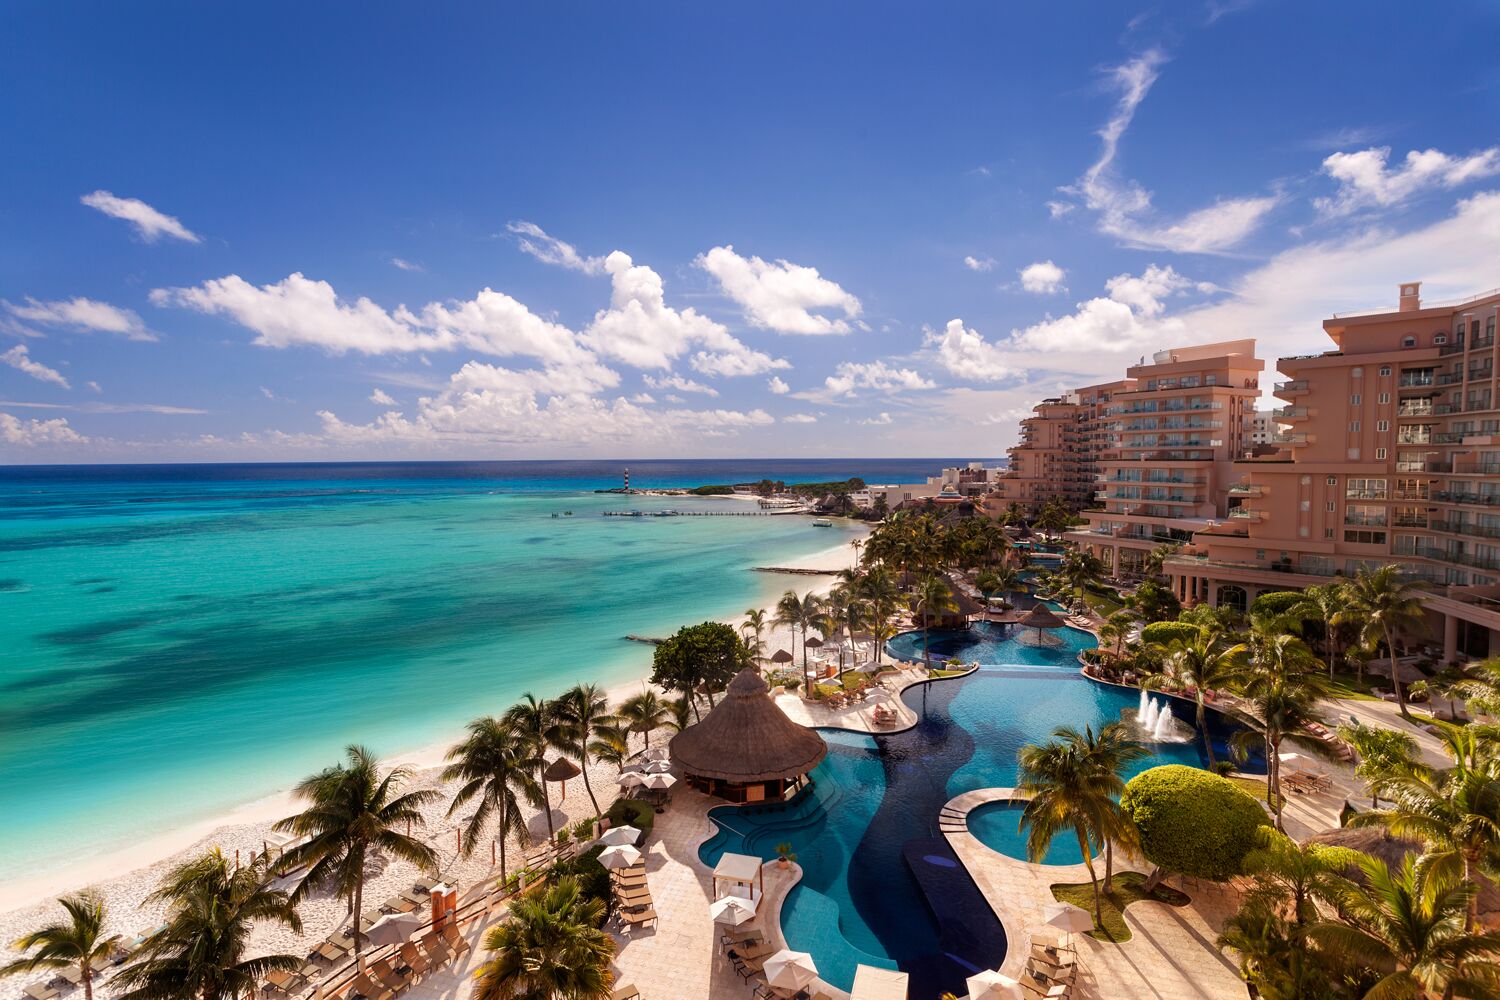 Your Magnificent Vacay at Grand Fiesta Americana’s Coral Beach Cancun